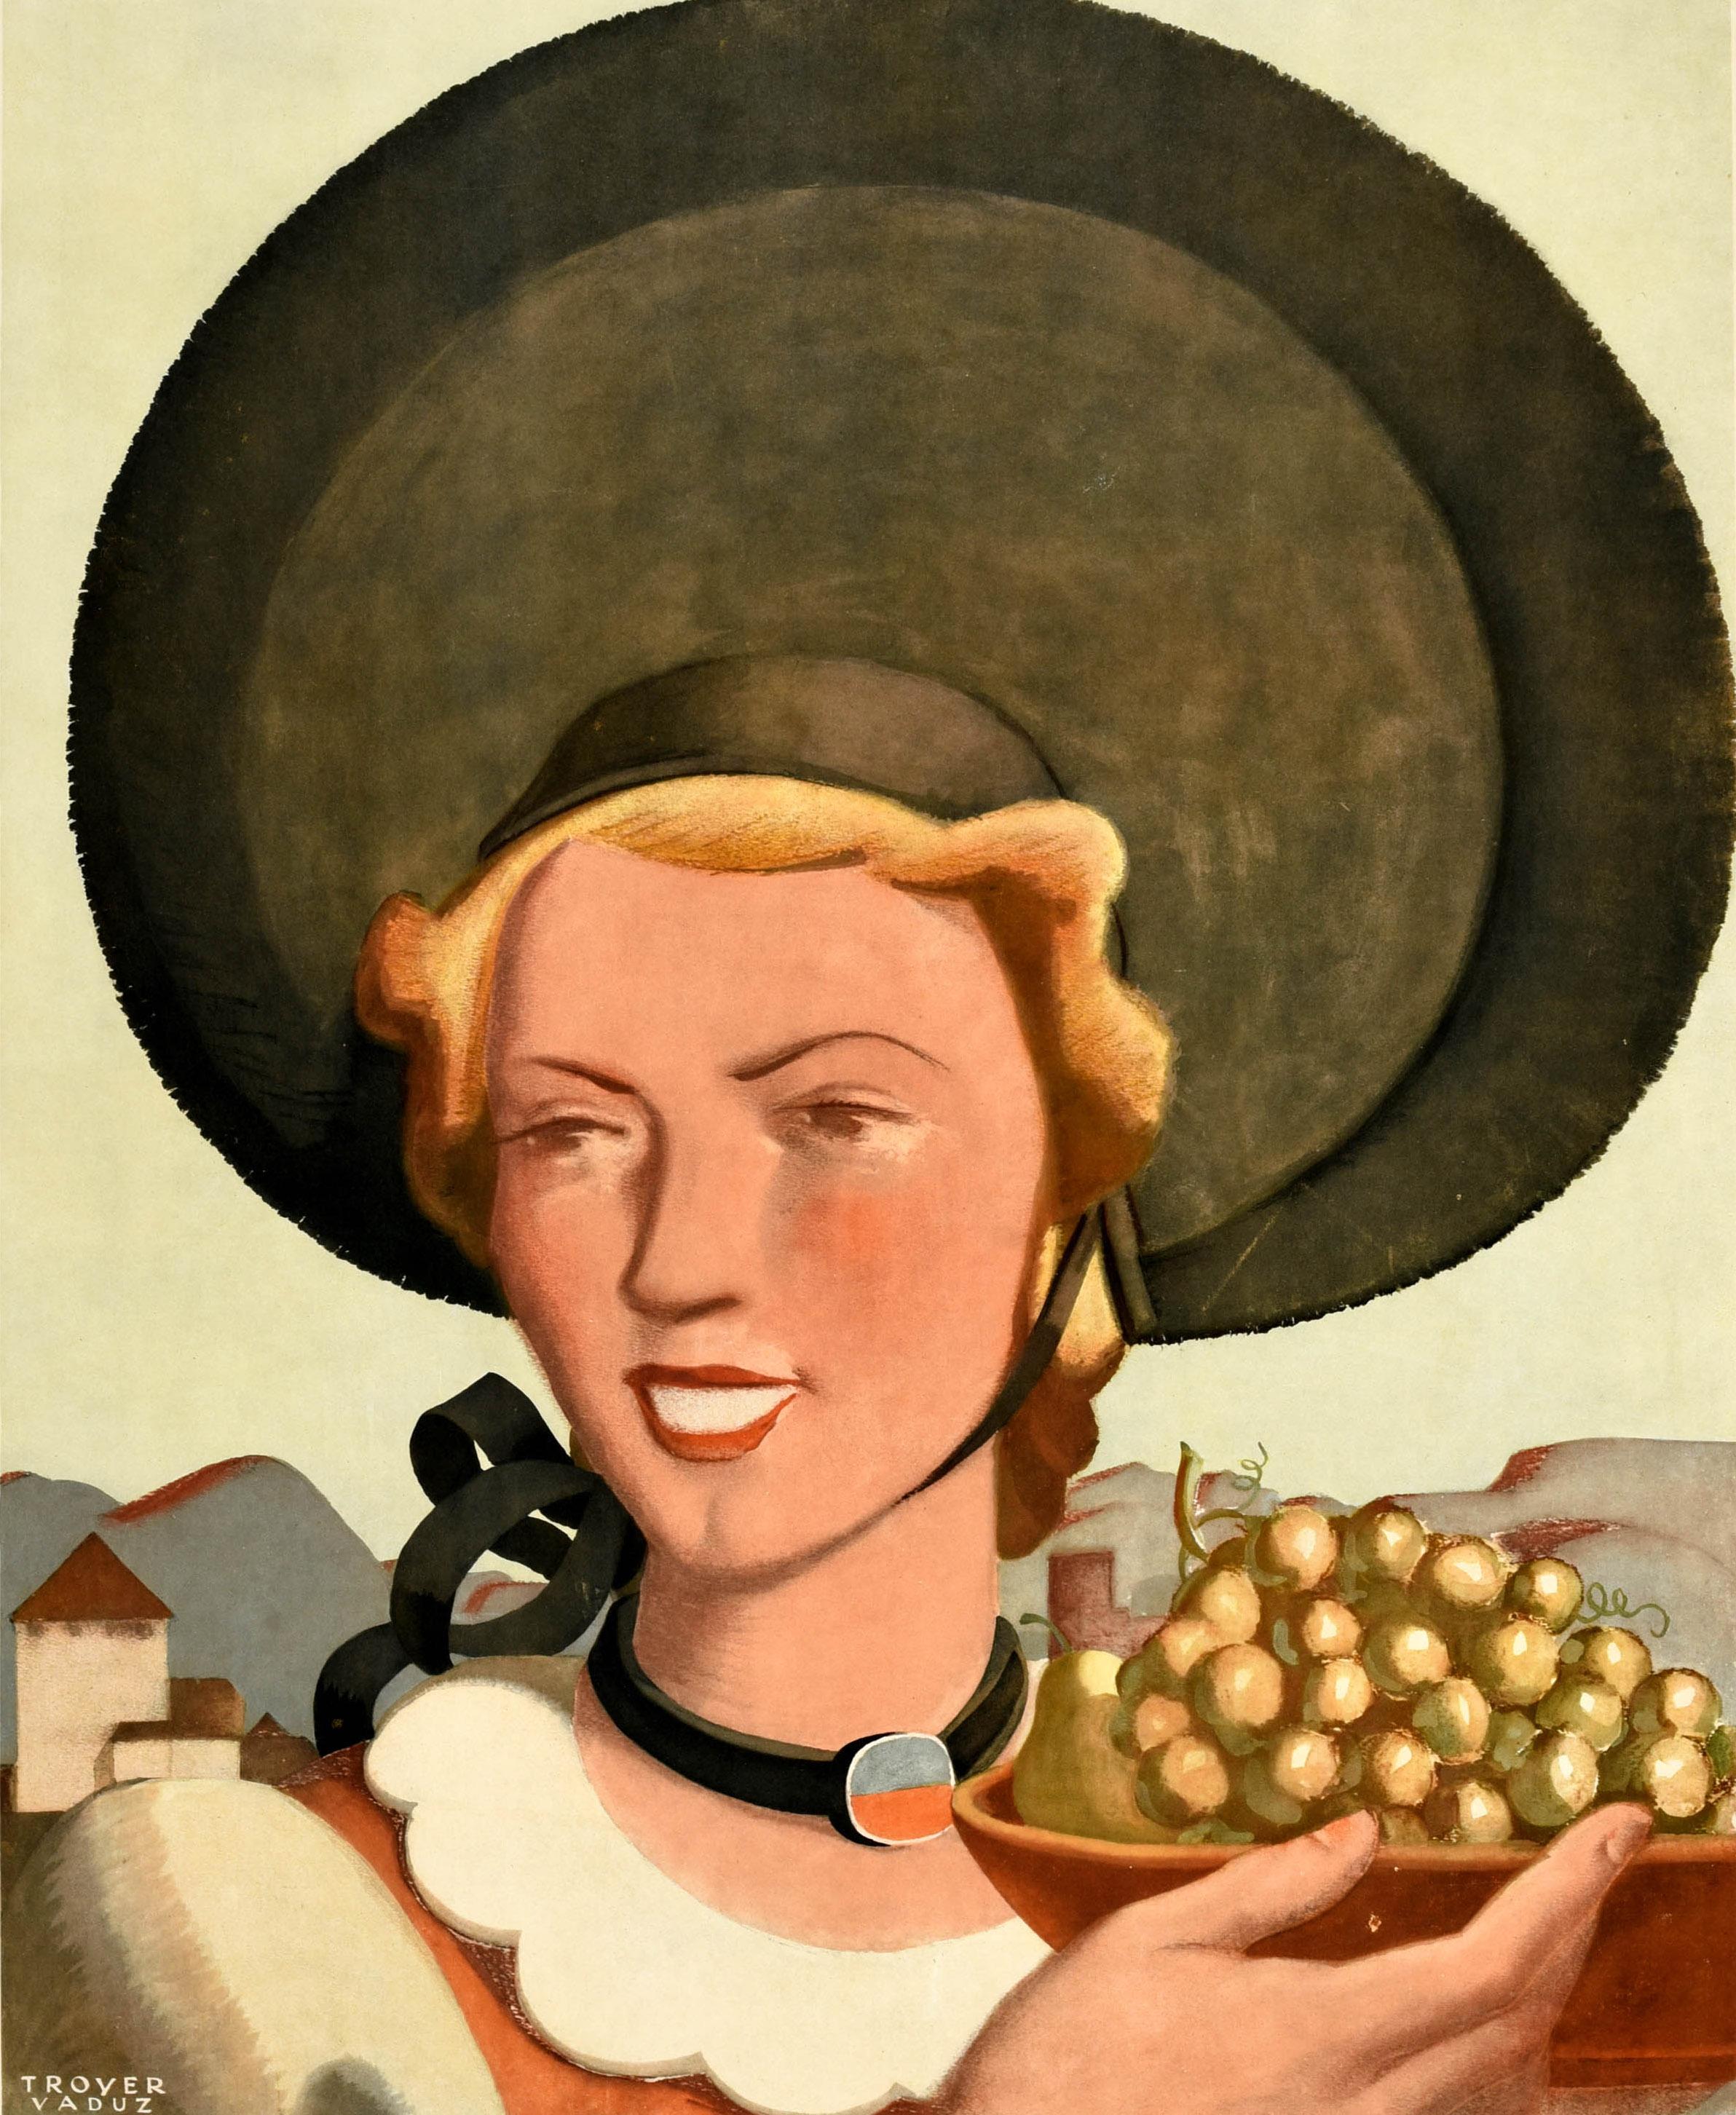 Original vintage travel poster for the Principality of Liechtenstein / Furstentum Liechtenstein featuring artwork by Johannes Troyer (1902-1969) of a smiling lady wearing a large hat and holding up a bowl of grapes in front of an old building and